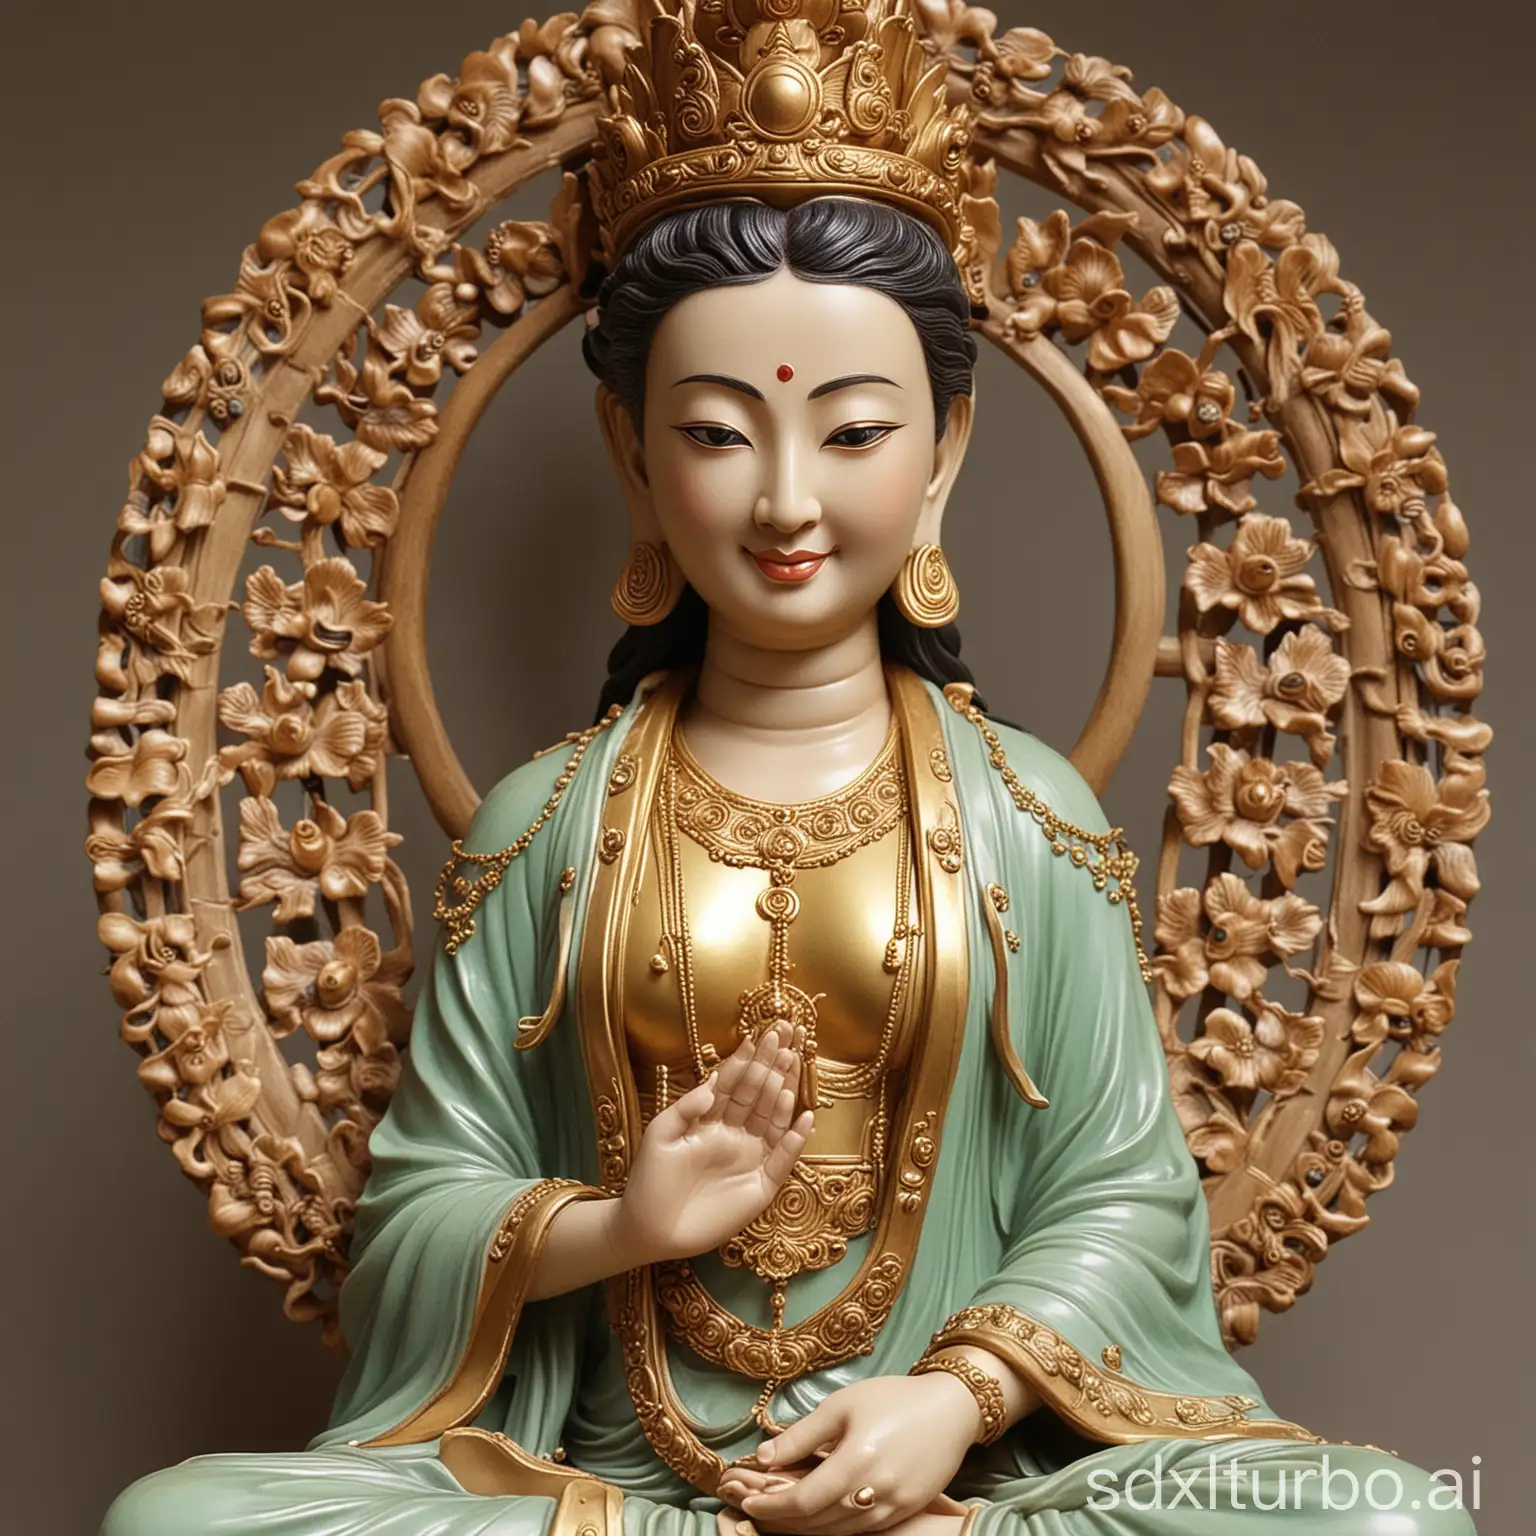 Tranquil-Guanyin-Bodhisattva-with-Serene-Smile-and-Compassionate-Eyes